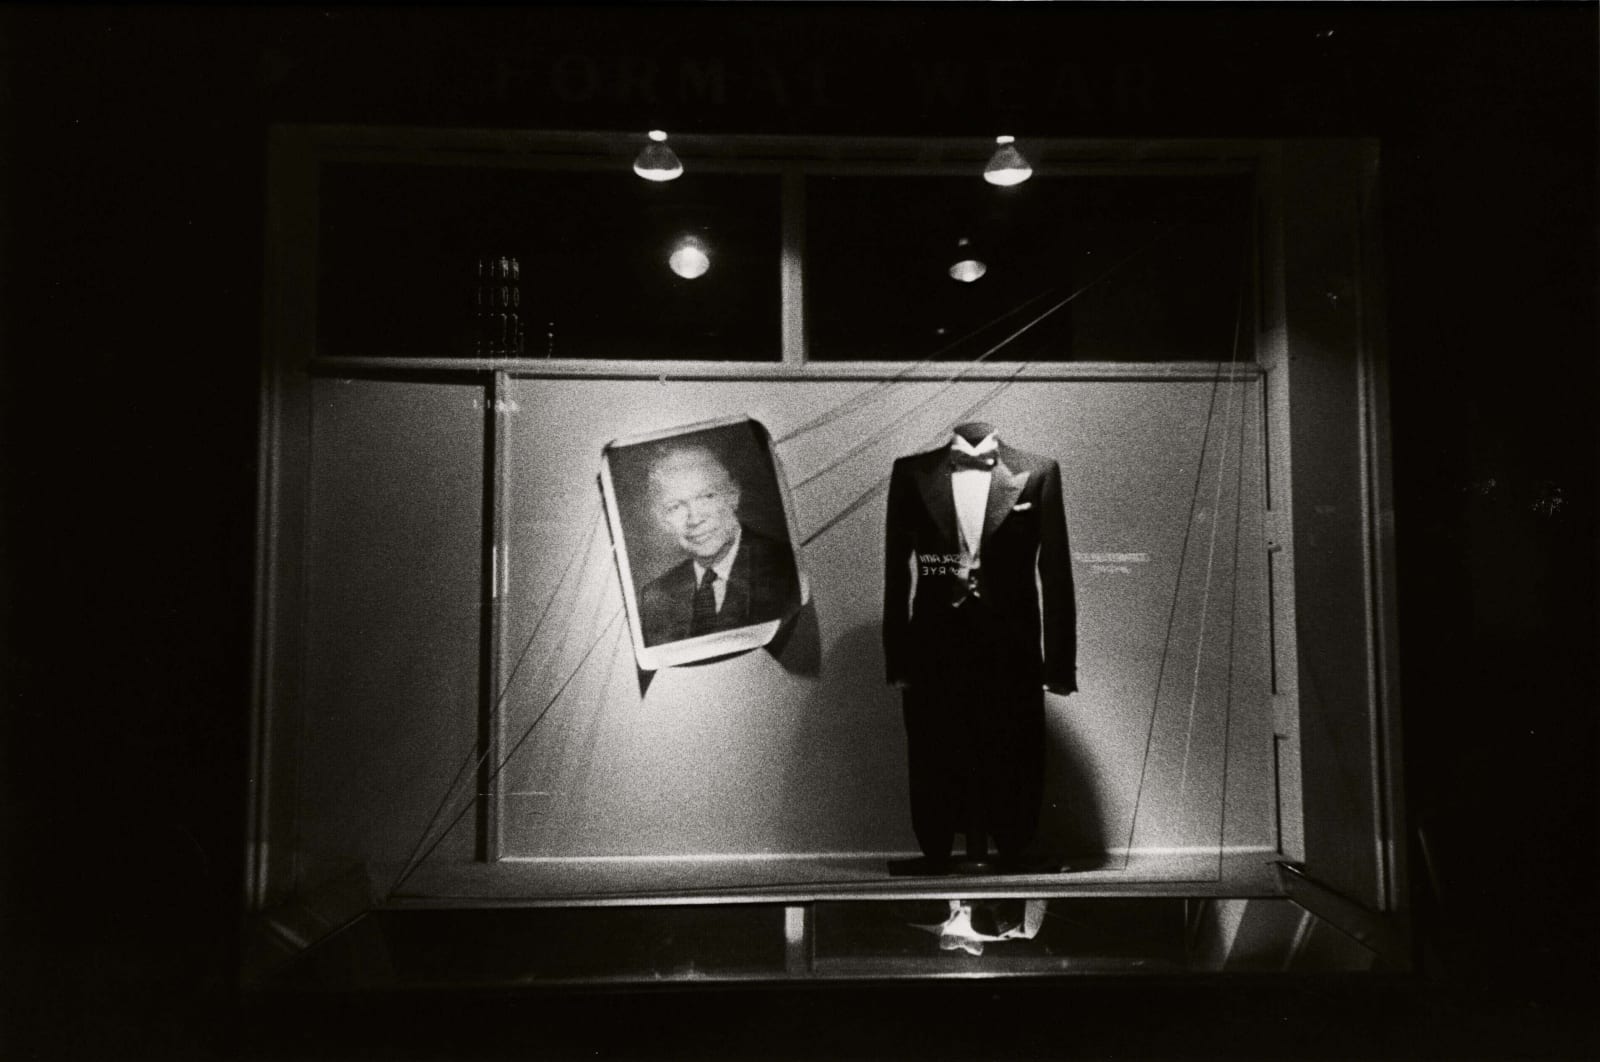 Robert Frank Washington DC storefront window with tuxedo and picture of President Eisenhower